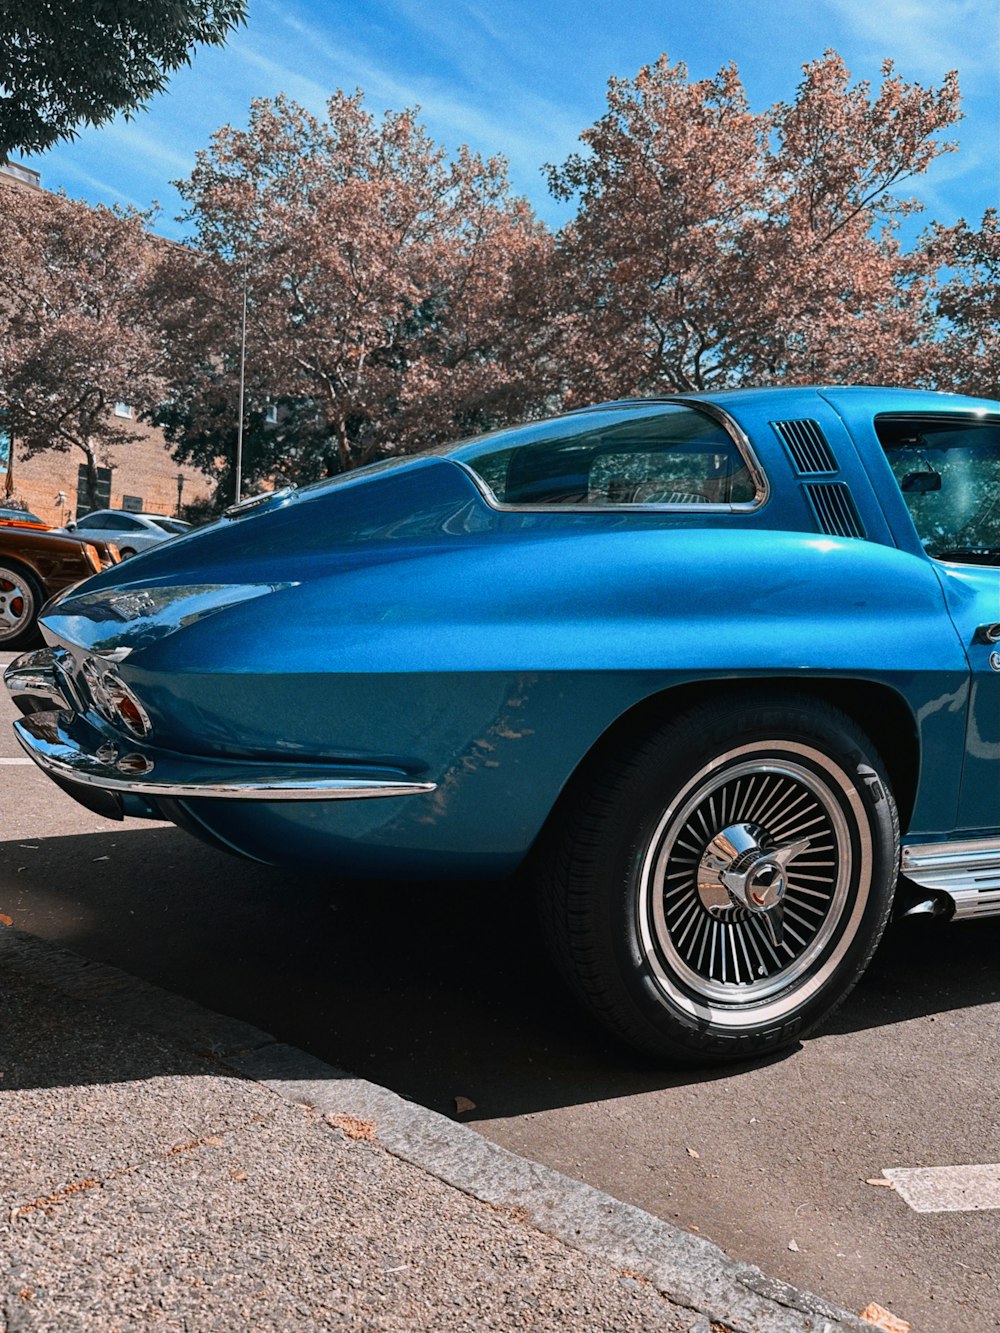 a blue classic car parked in a parking lot